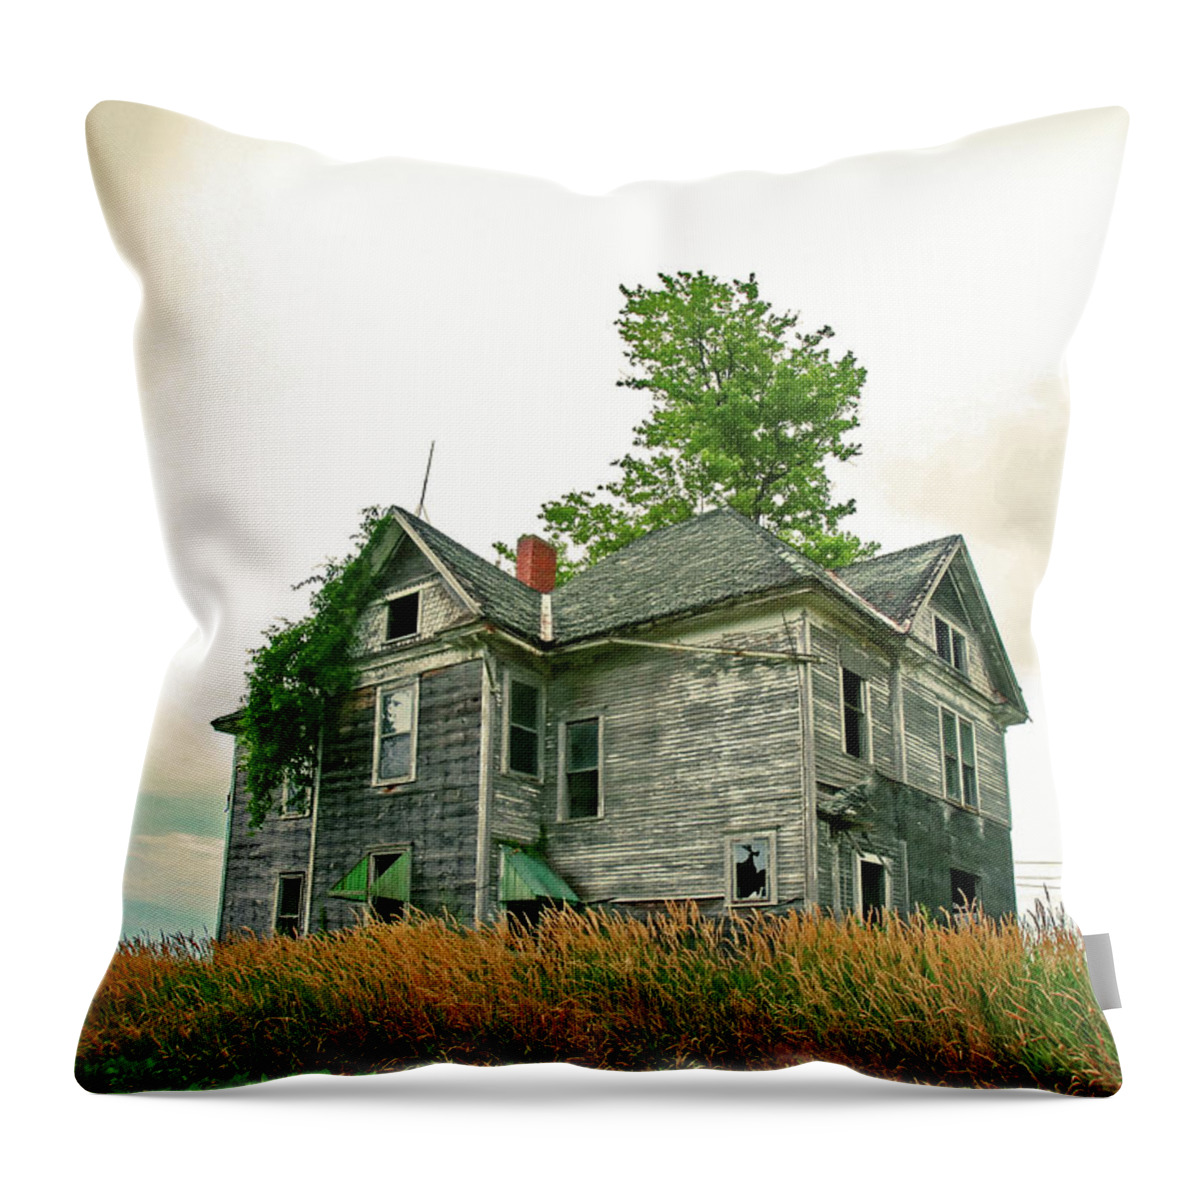 Haunted House Throw Pillow featuring the photograph Haunted House by Todd Klassy